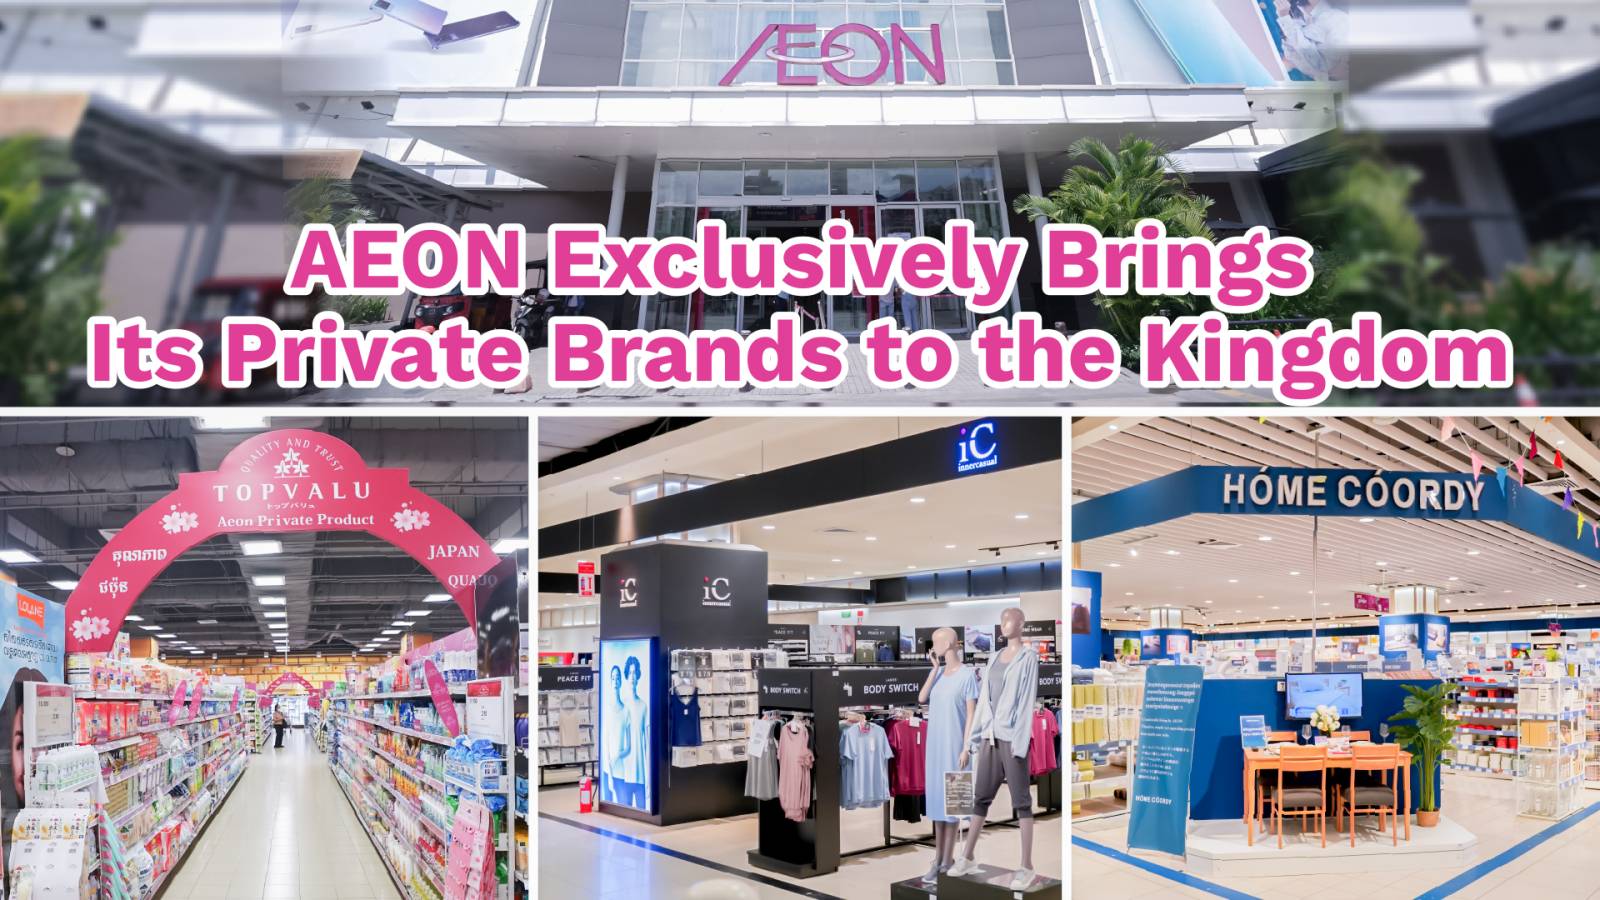 First Calvin Klein multi-brand lifestyle store opens at Aeon Mall